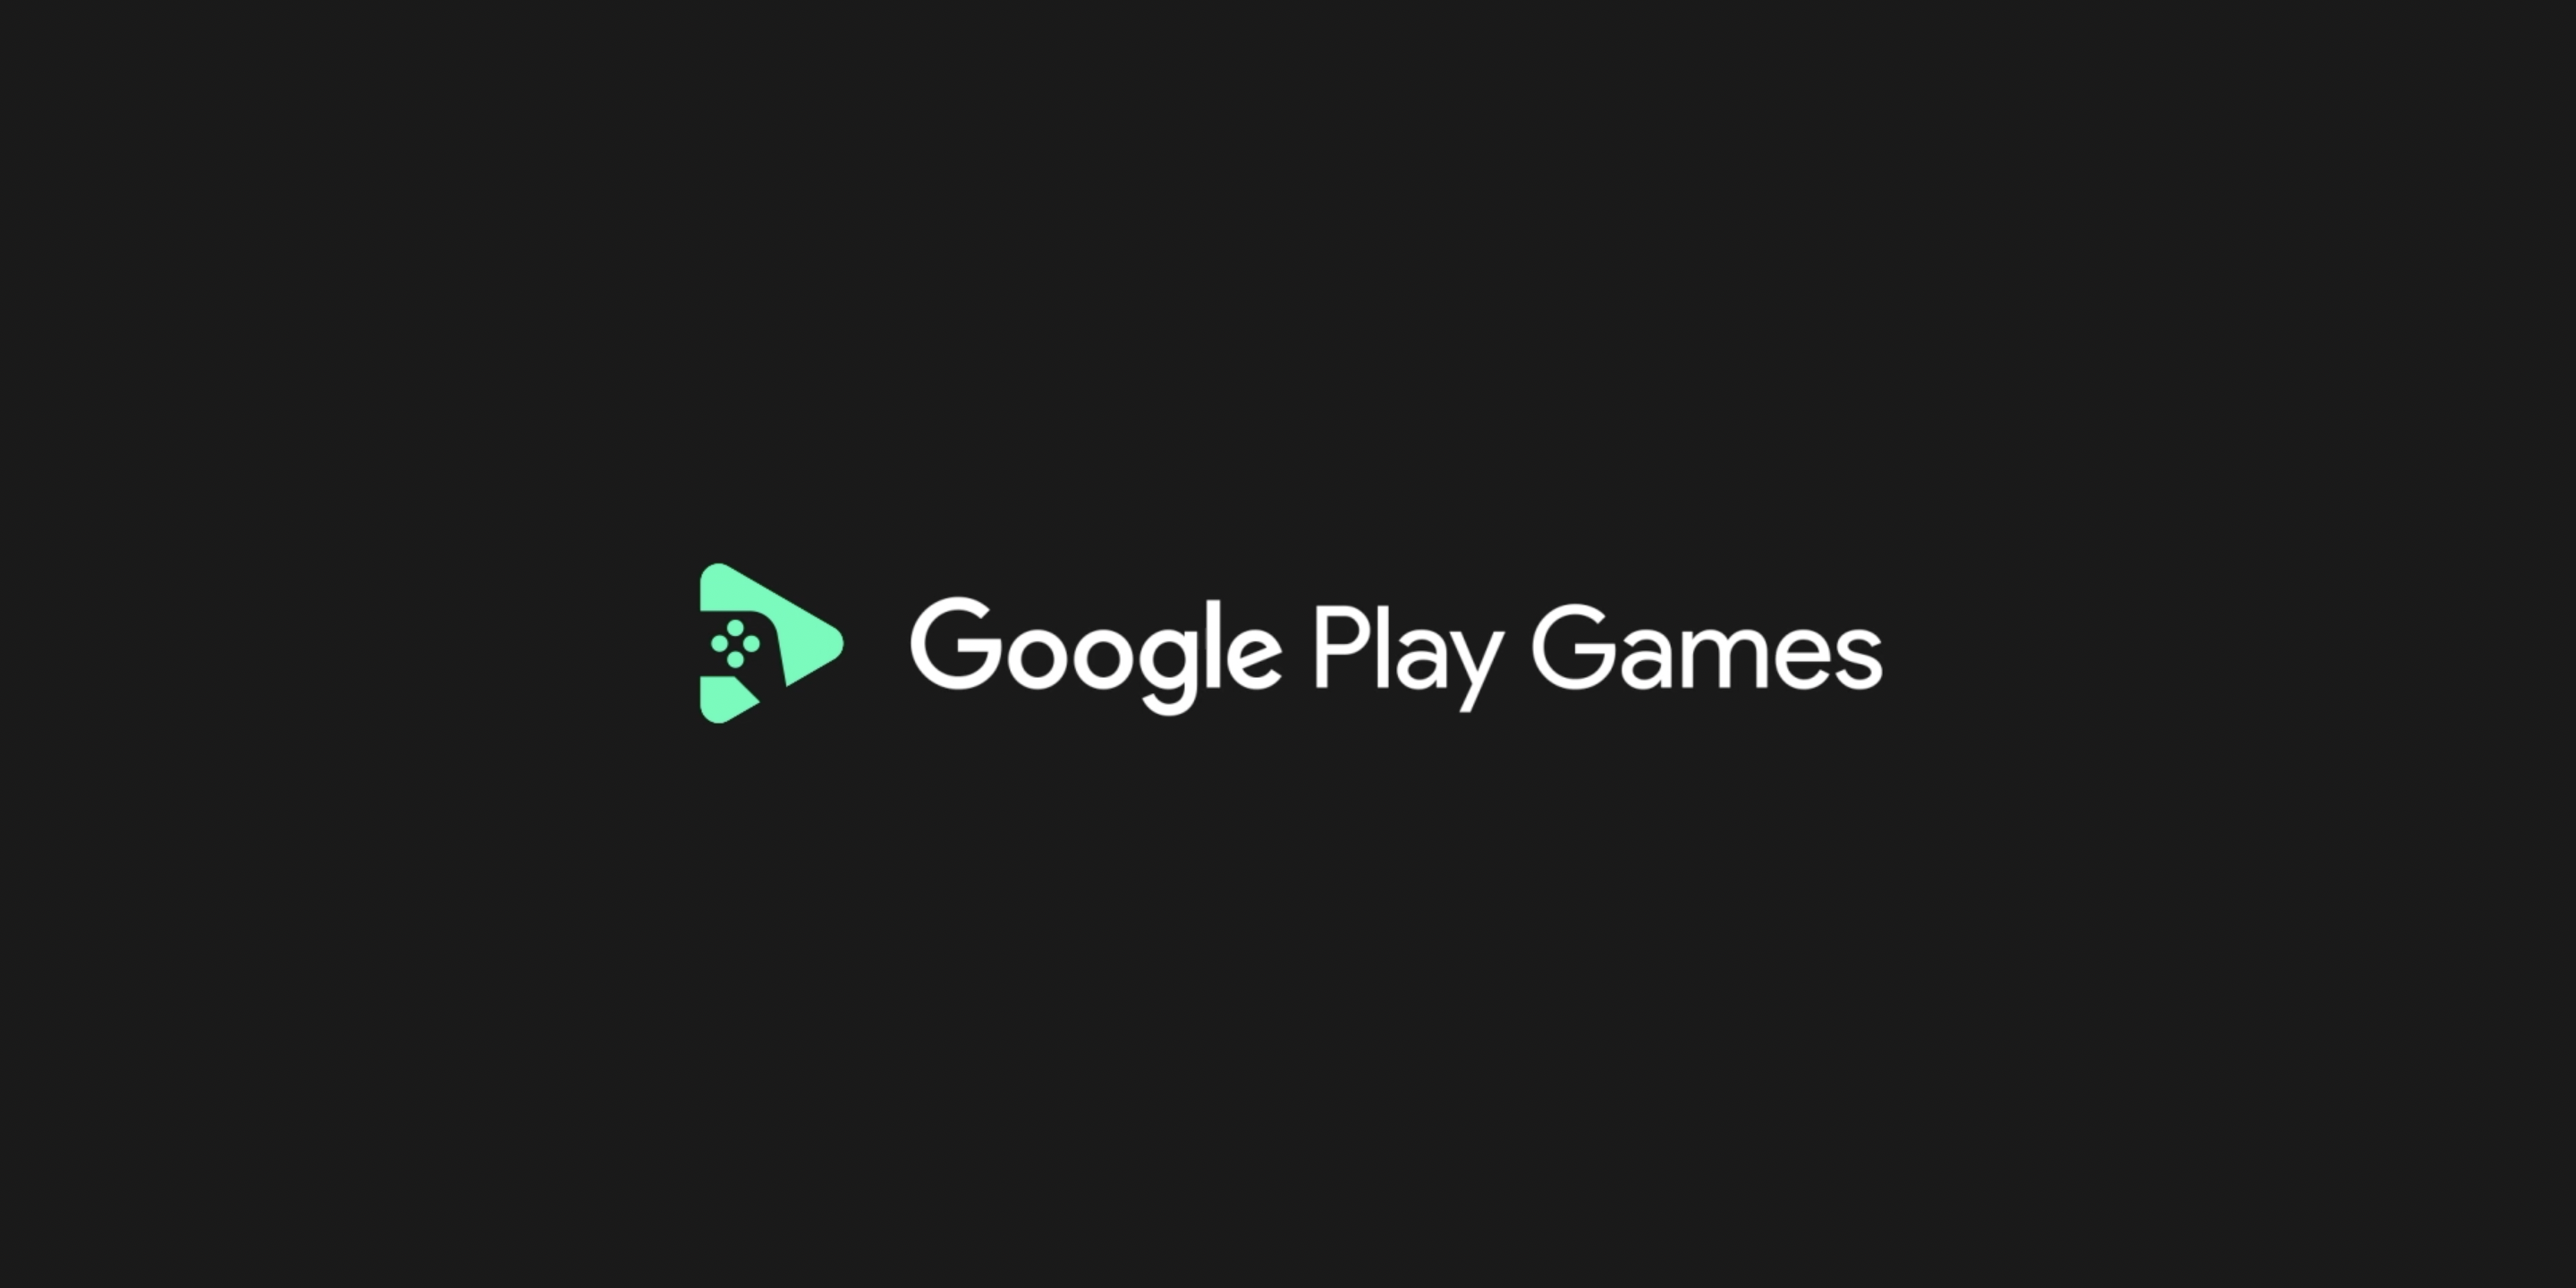 Google Play Android Games Can Now Be Played on Your PC - CNET